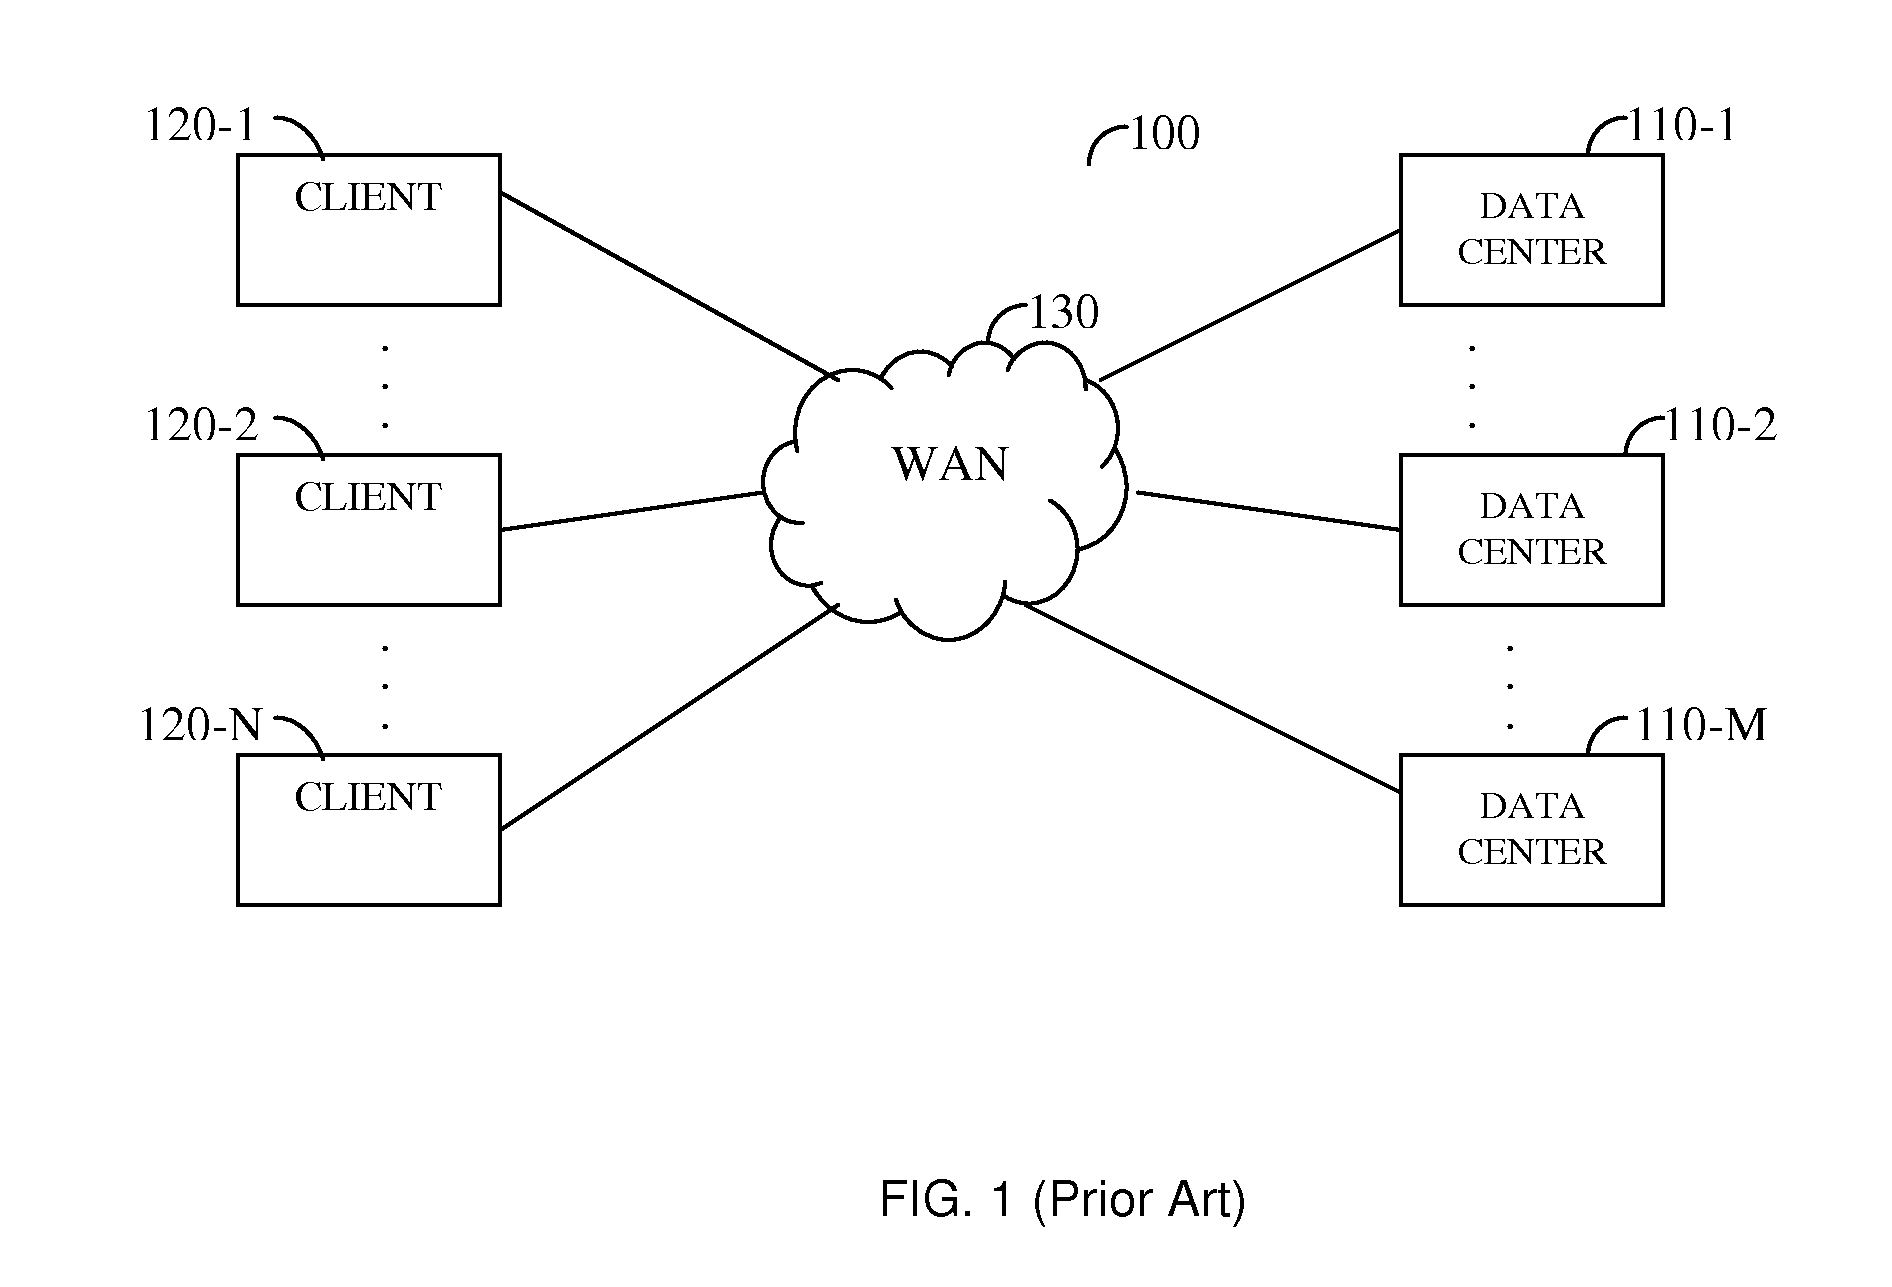 Cloud connector for interfacing between a network attached storage device and a cloud storage system